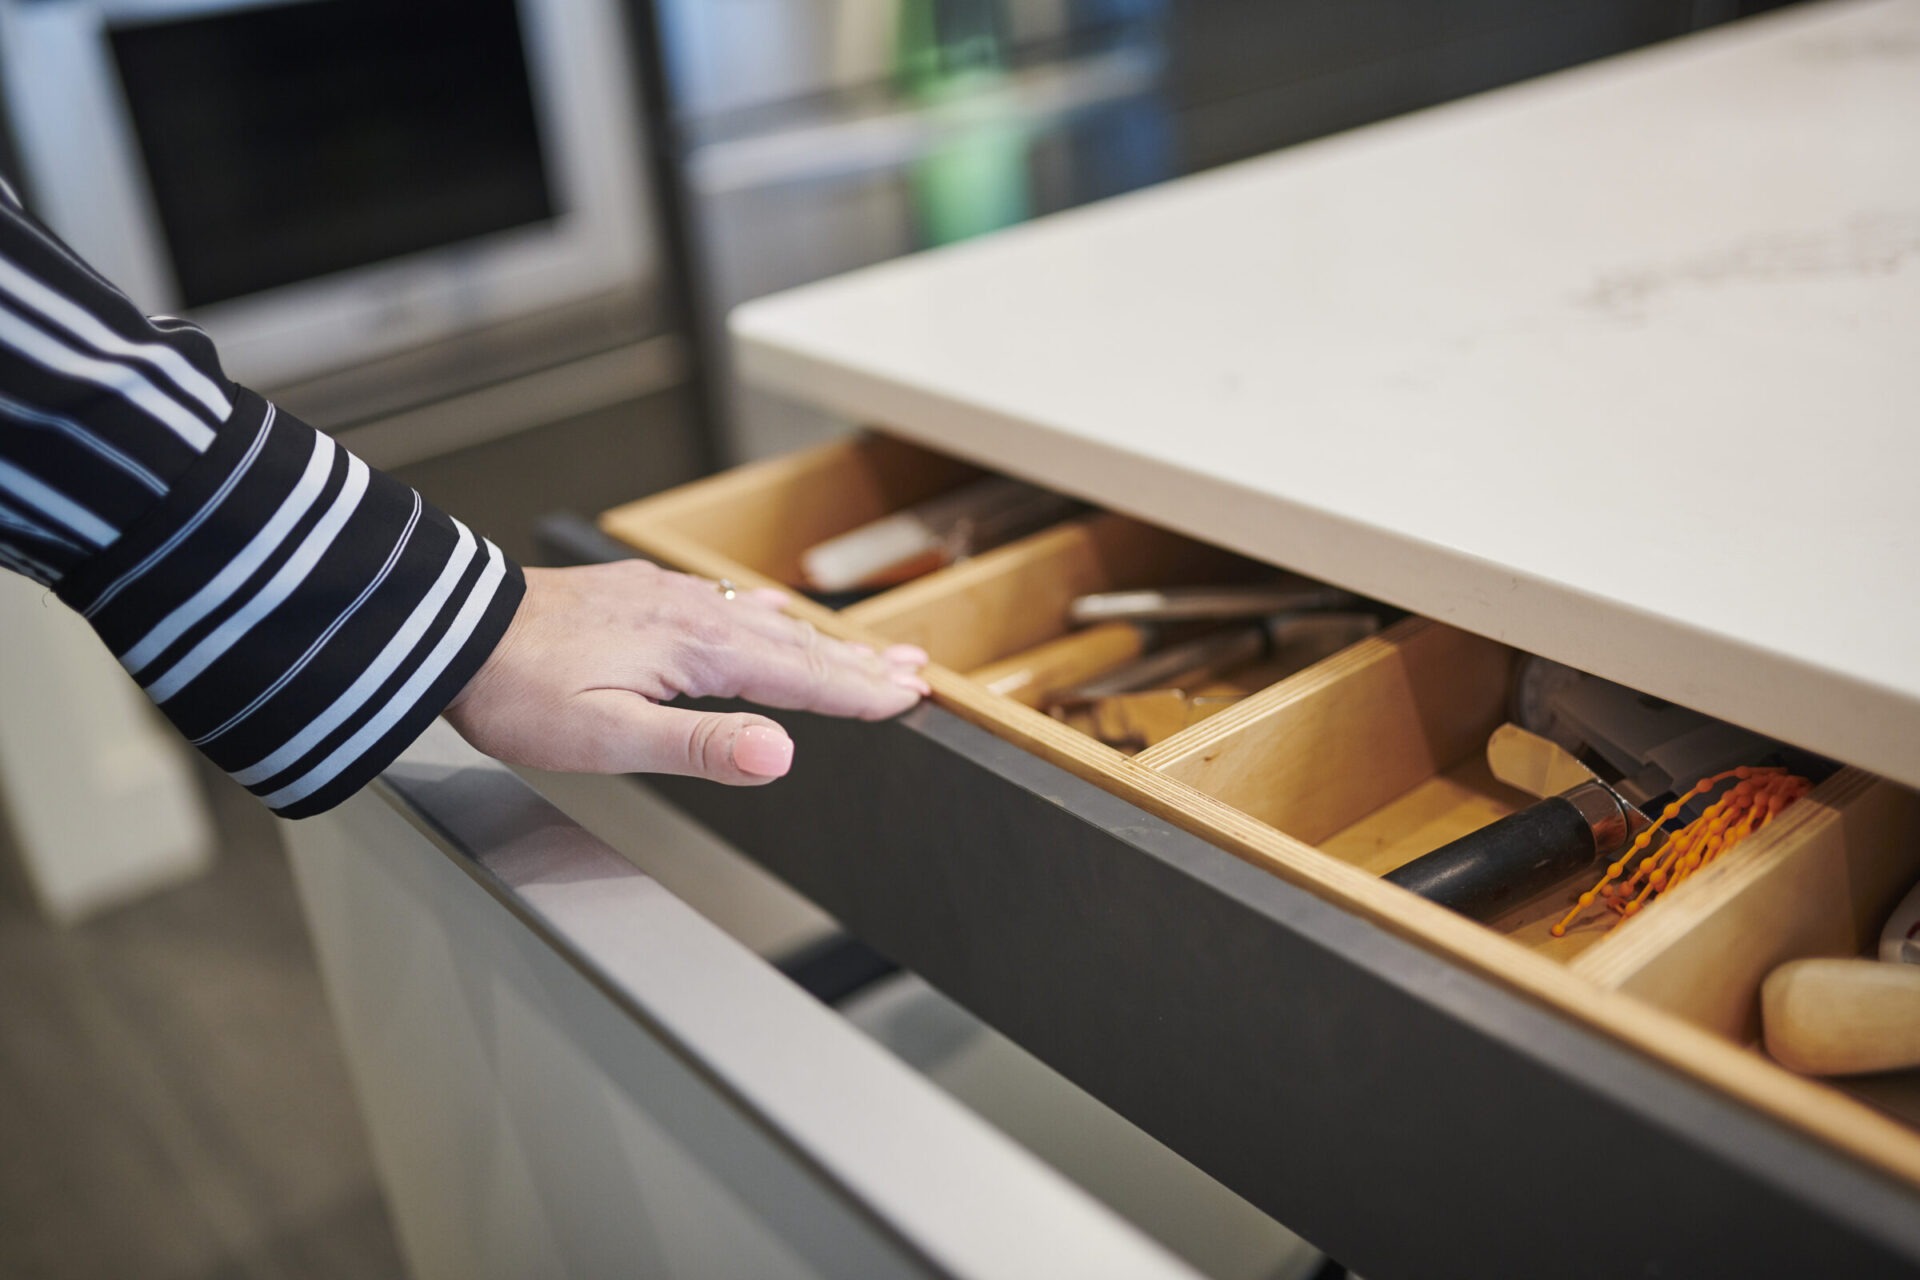 A person is opening a modern kitchen drawer revealing neatly organized utensils. The person wears a striped shirt with a ¾ sleeve.